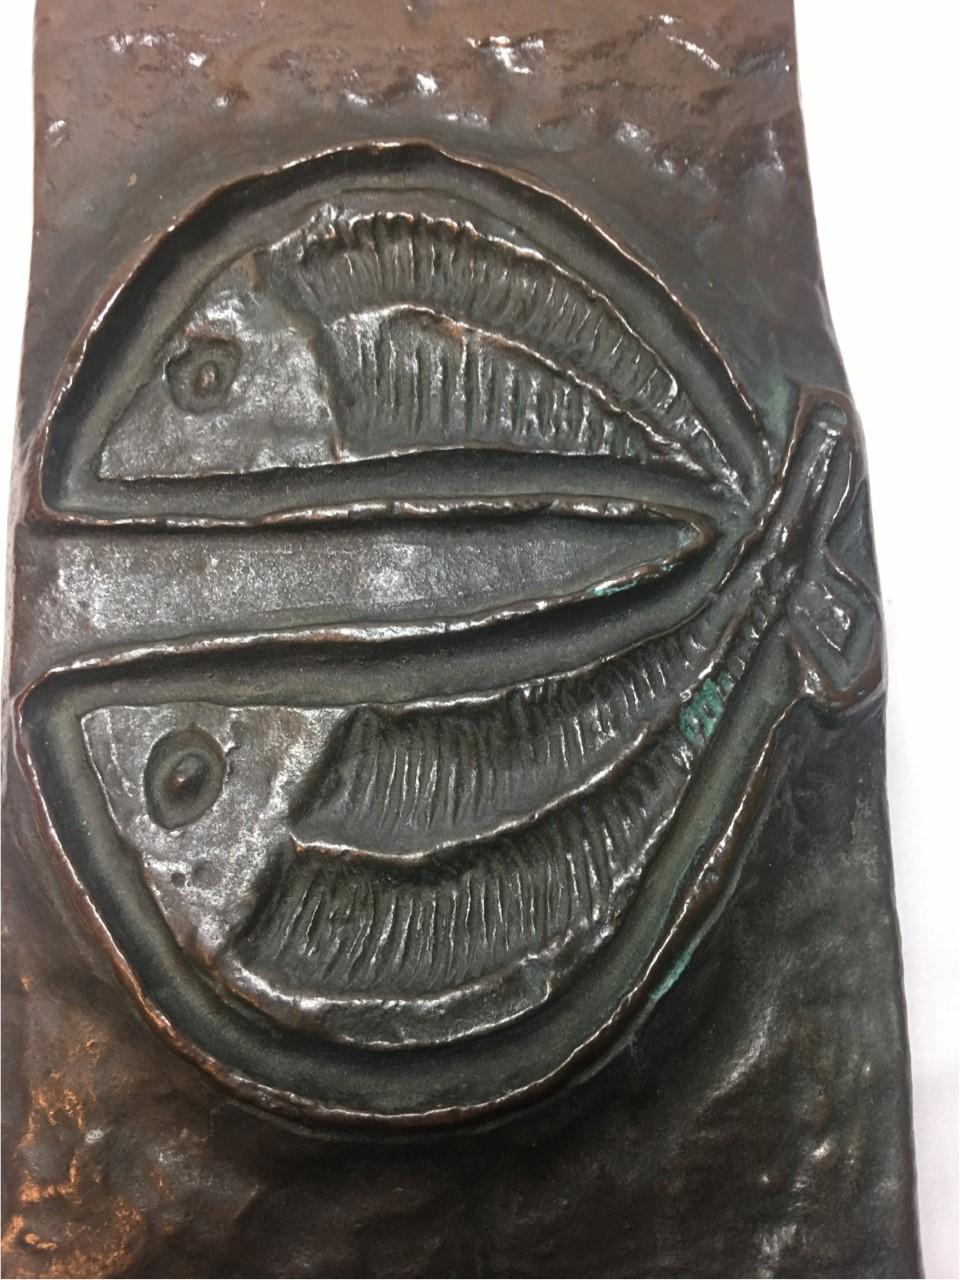 A single two fish bronze front door handle. In very good condition and an impressive entry piece.